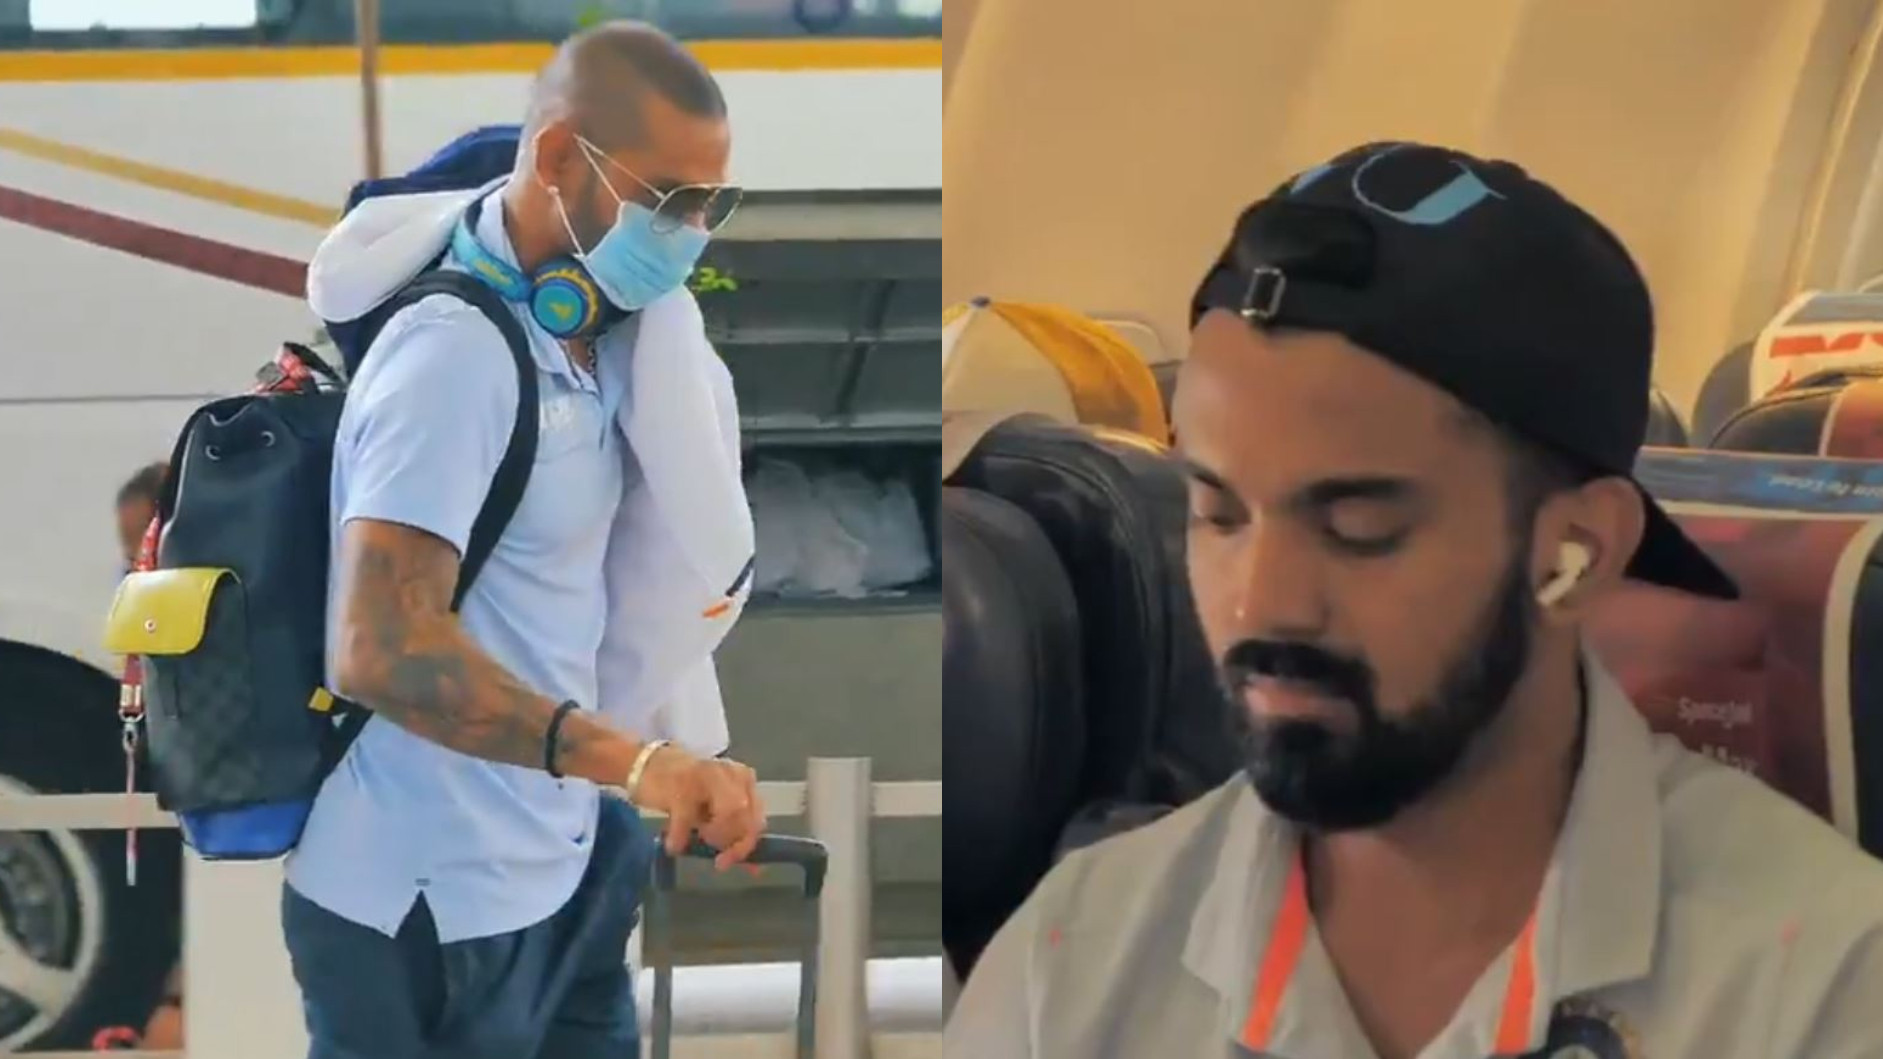 IND v ENG 2021: WATCH- Team India players reach Pune for the ODI series against England